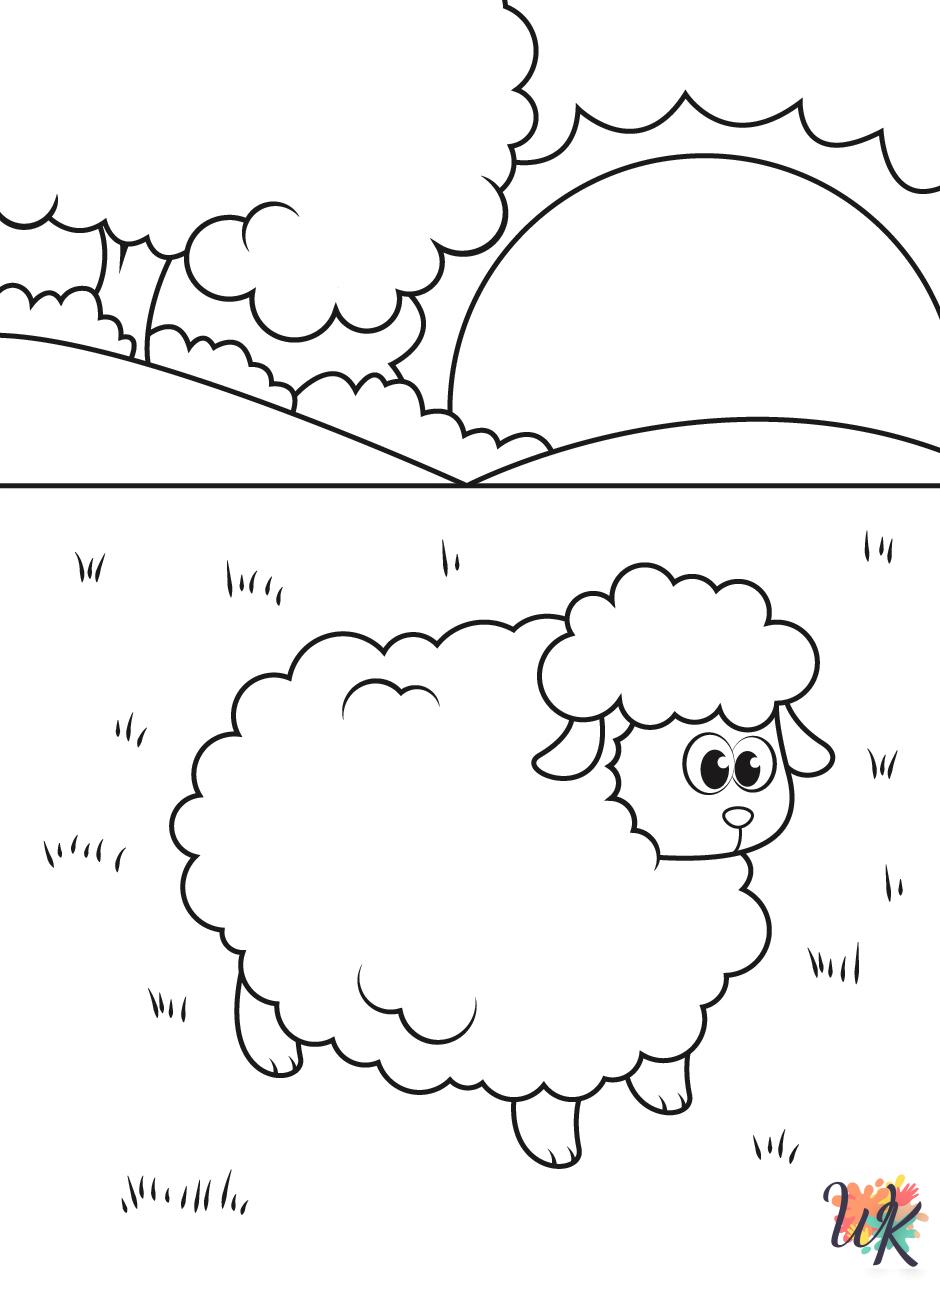 Sheep coloring pages free printable